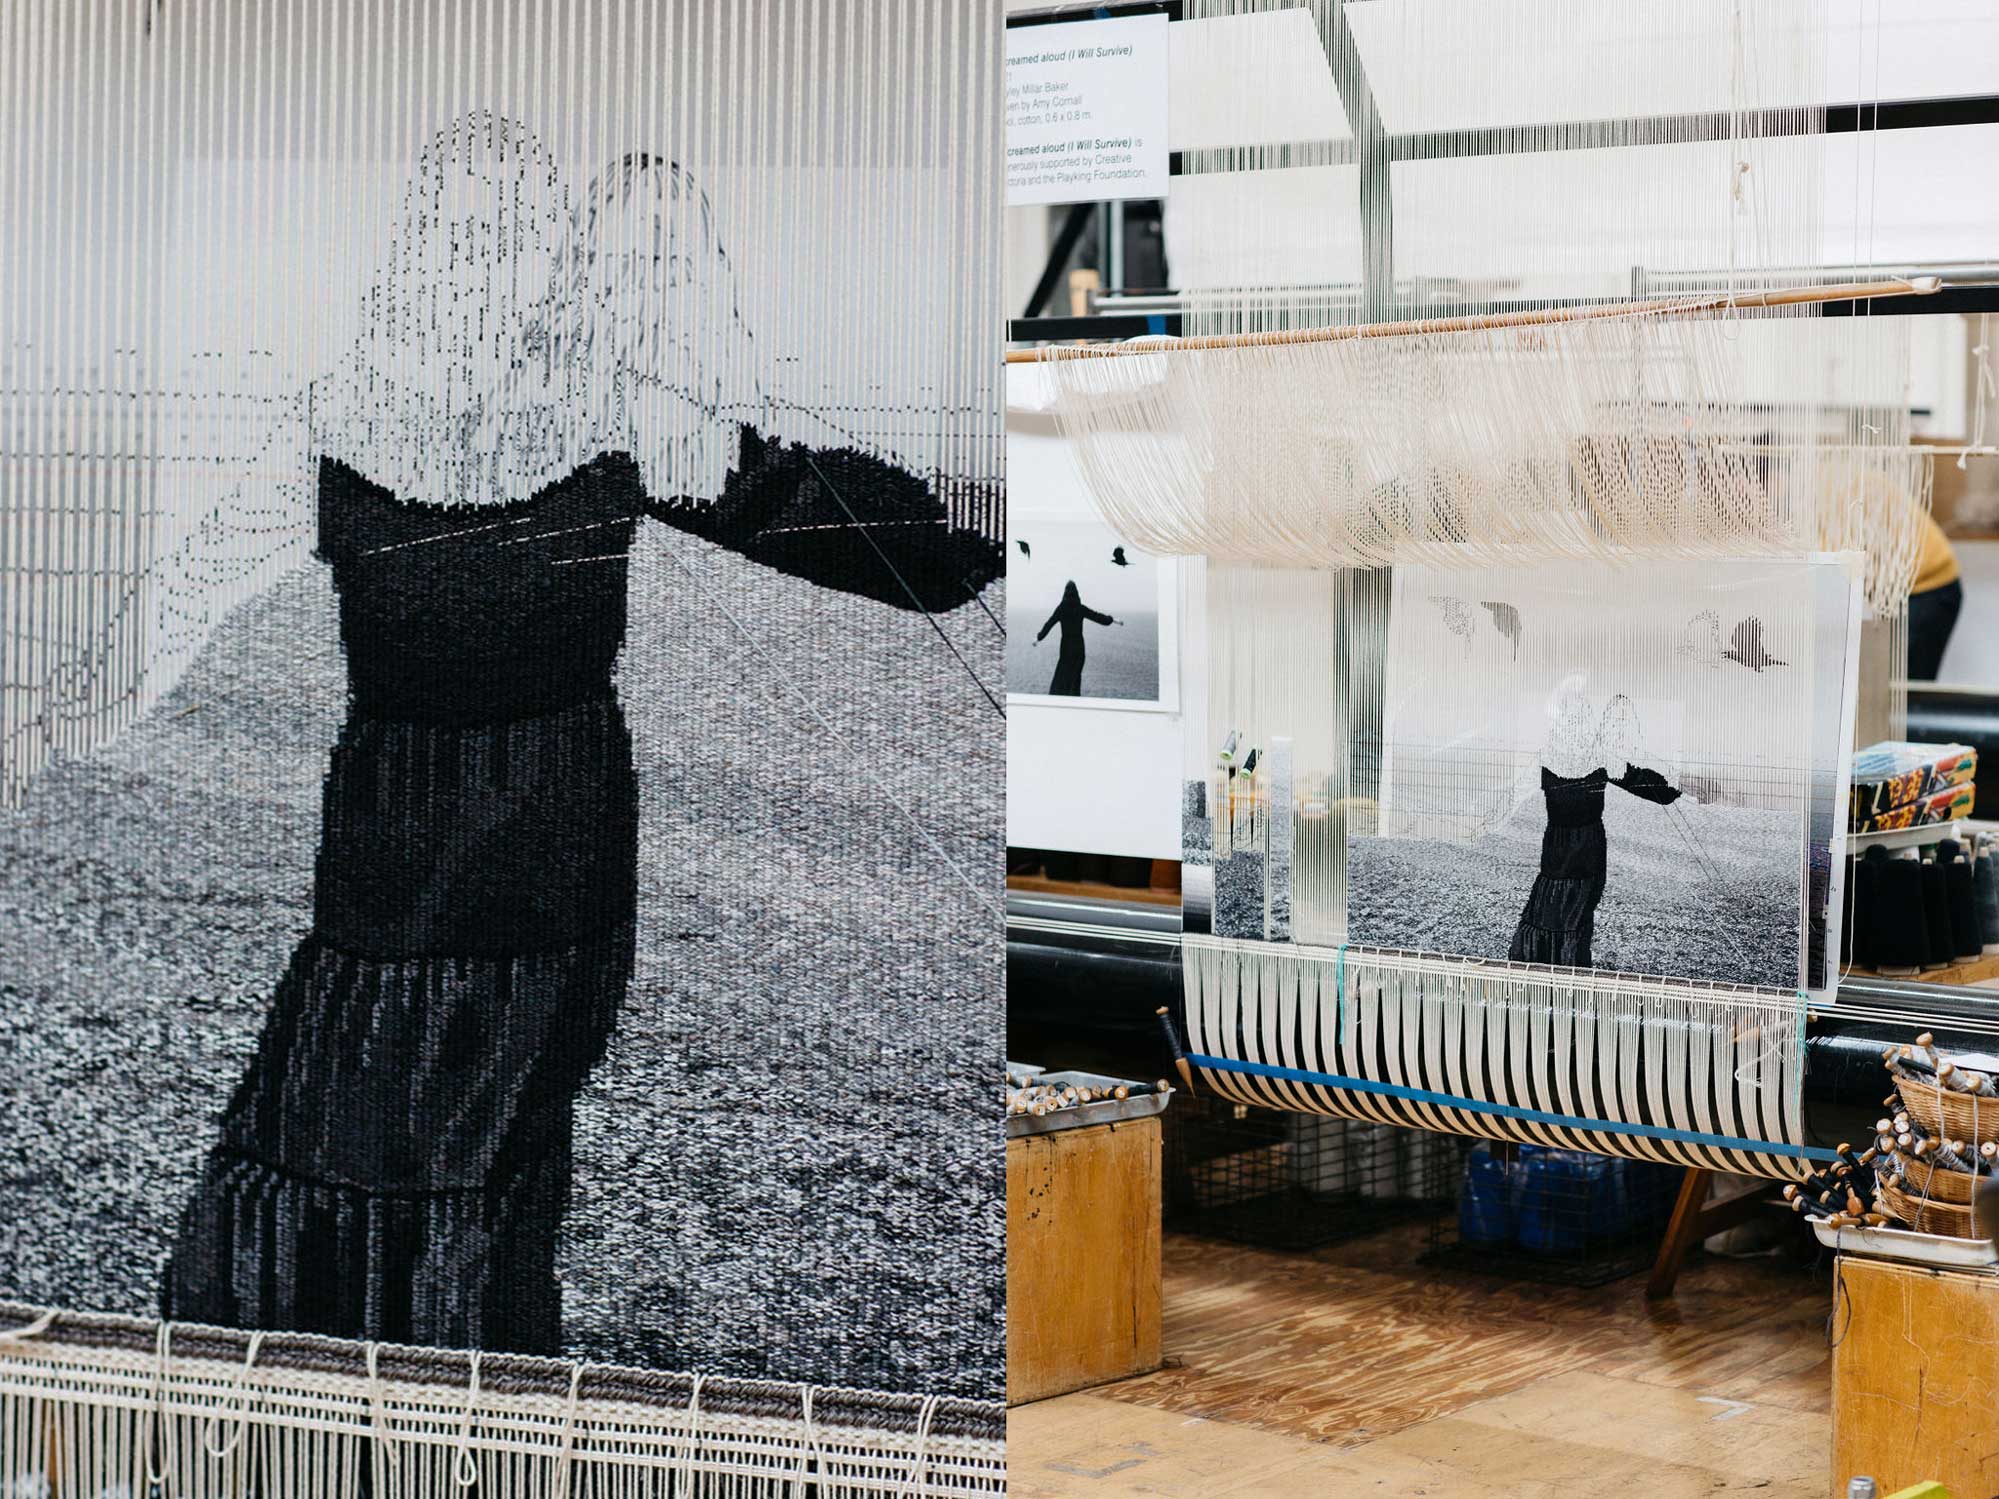 Tapestry in Progress: 'I screamed aloud (I Will Survive)', 2021, designed by Hayley Millar Baker, woven by Amy Cornall. Images courtesy of Marie-Luise Skibbe.